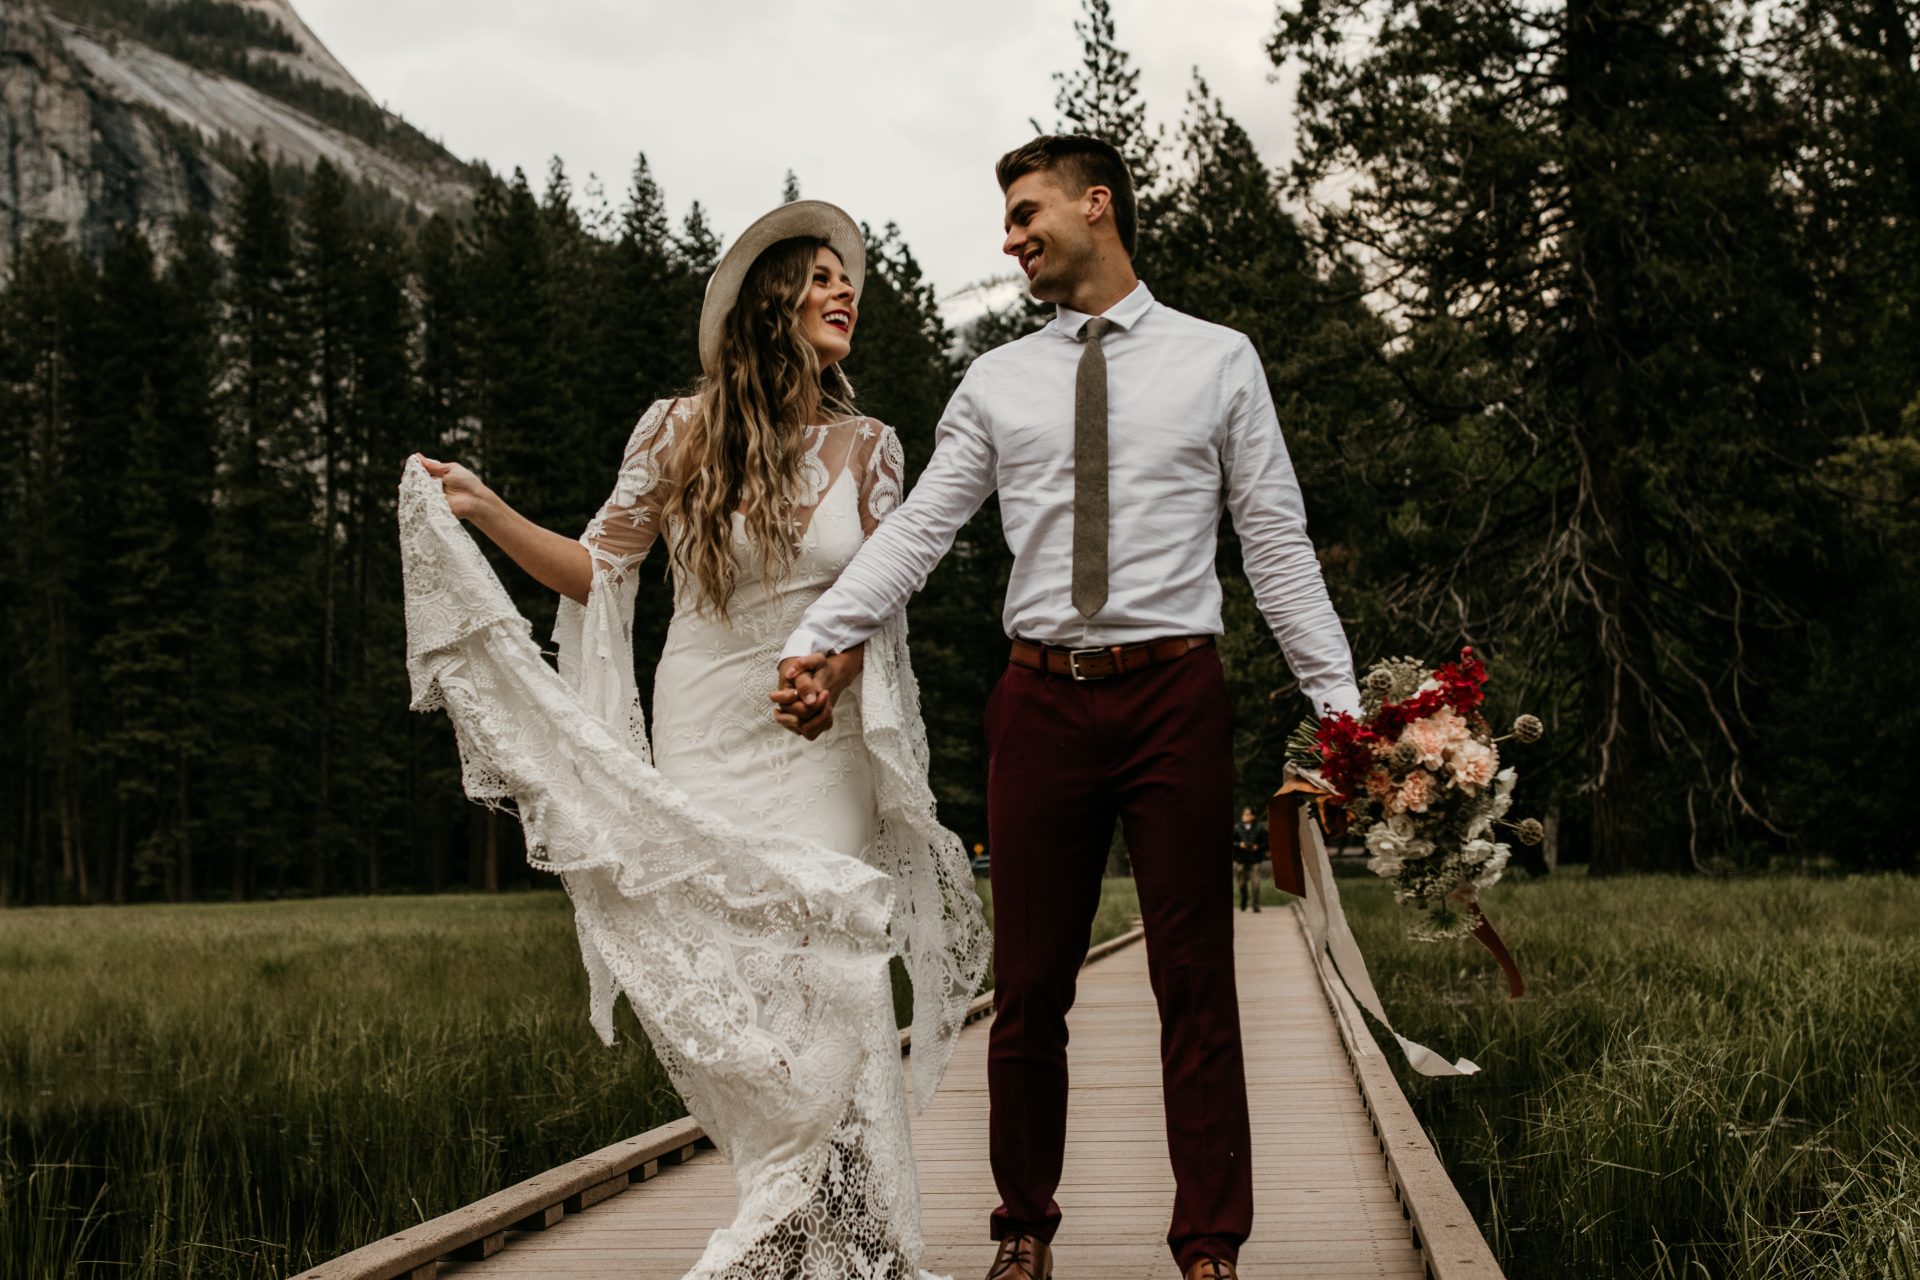 A bride and groom, her in a designer wedding gown by Rue de Seine, walking across a wooden bridge in Yosemite National Park for a styled photo shoot.